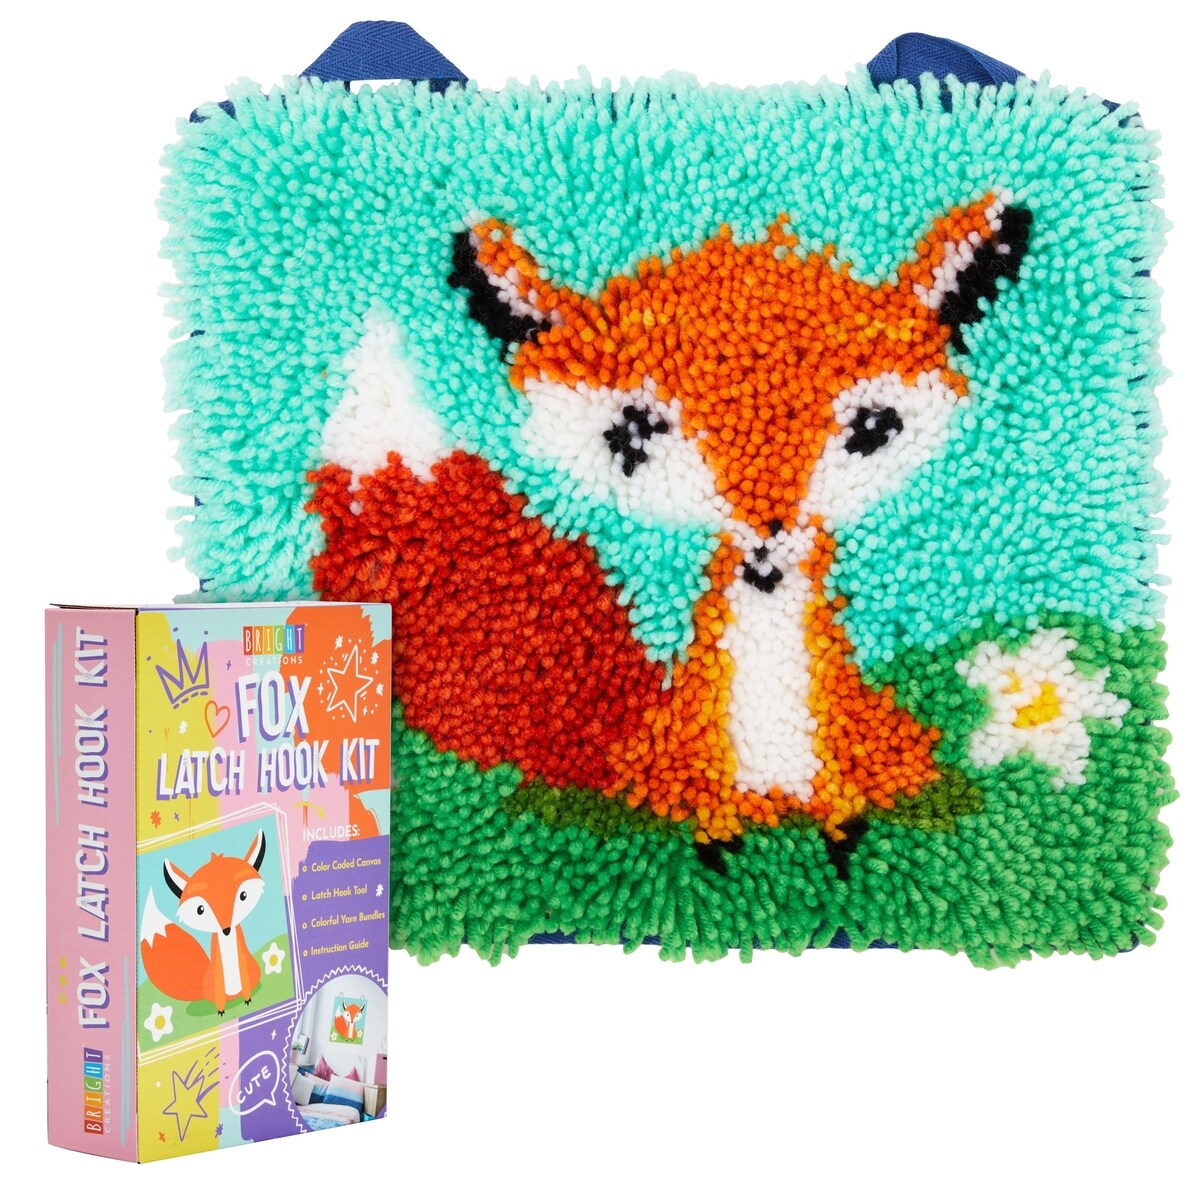 Mini Fox Latch Hook Rug Kit For Kids Crafts, Adults, and Beginners